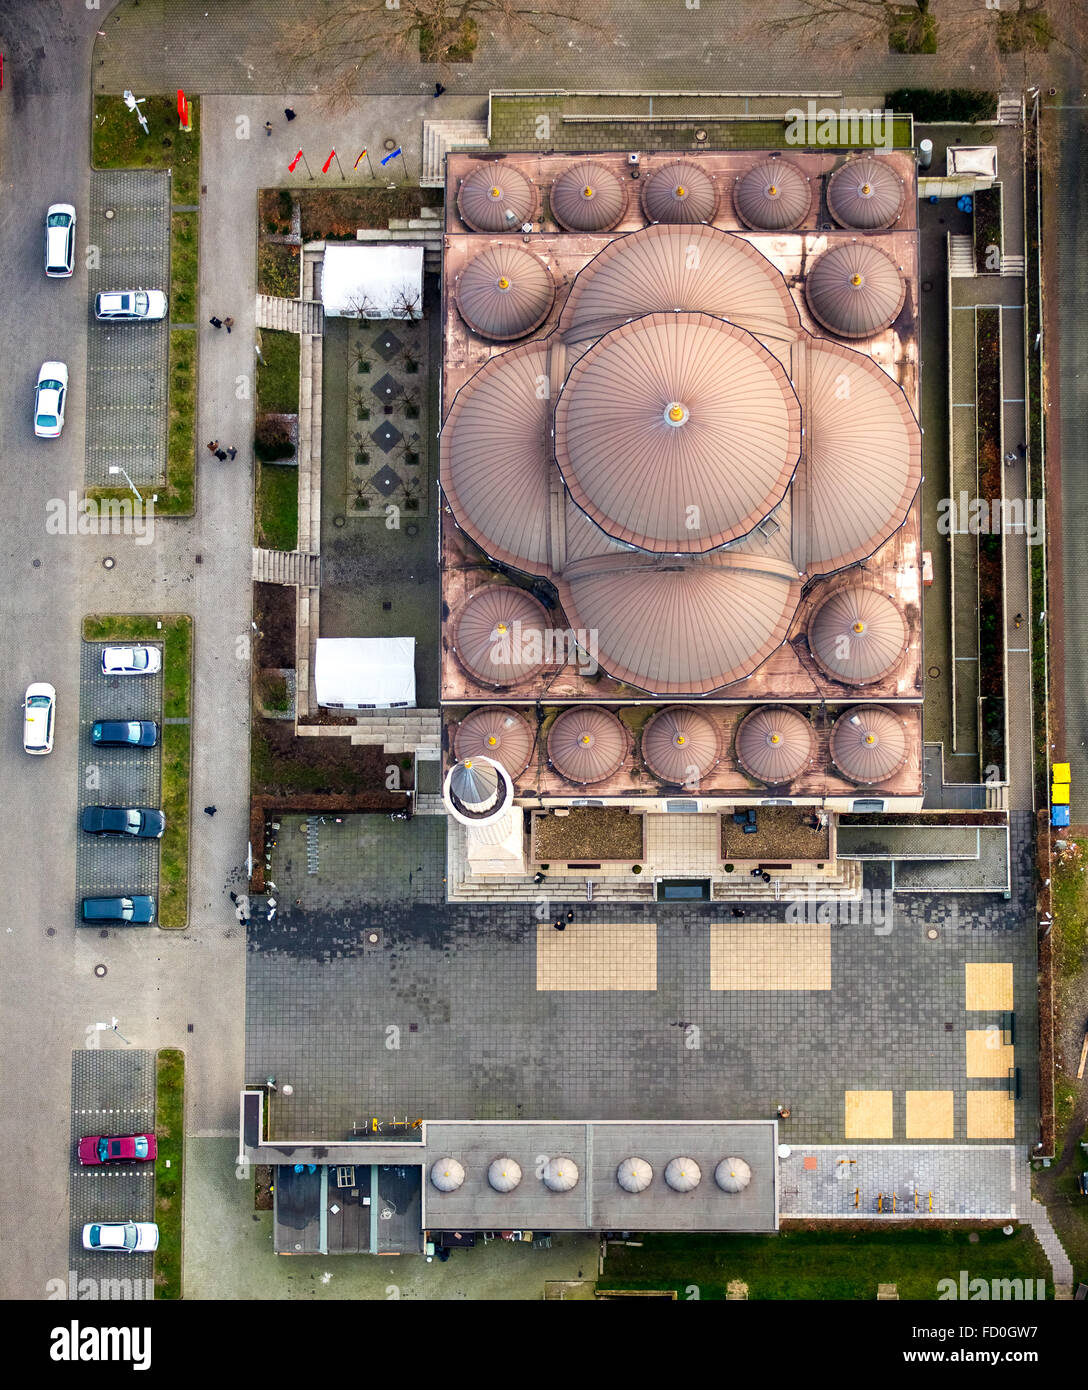 Aerial view, DITIB mosque Duisburg Marxloh, Islamism, Islamic place of worship, mosque controlled by the Turkish state, Duisburg Stock Photo